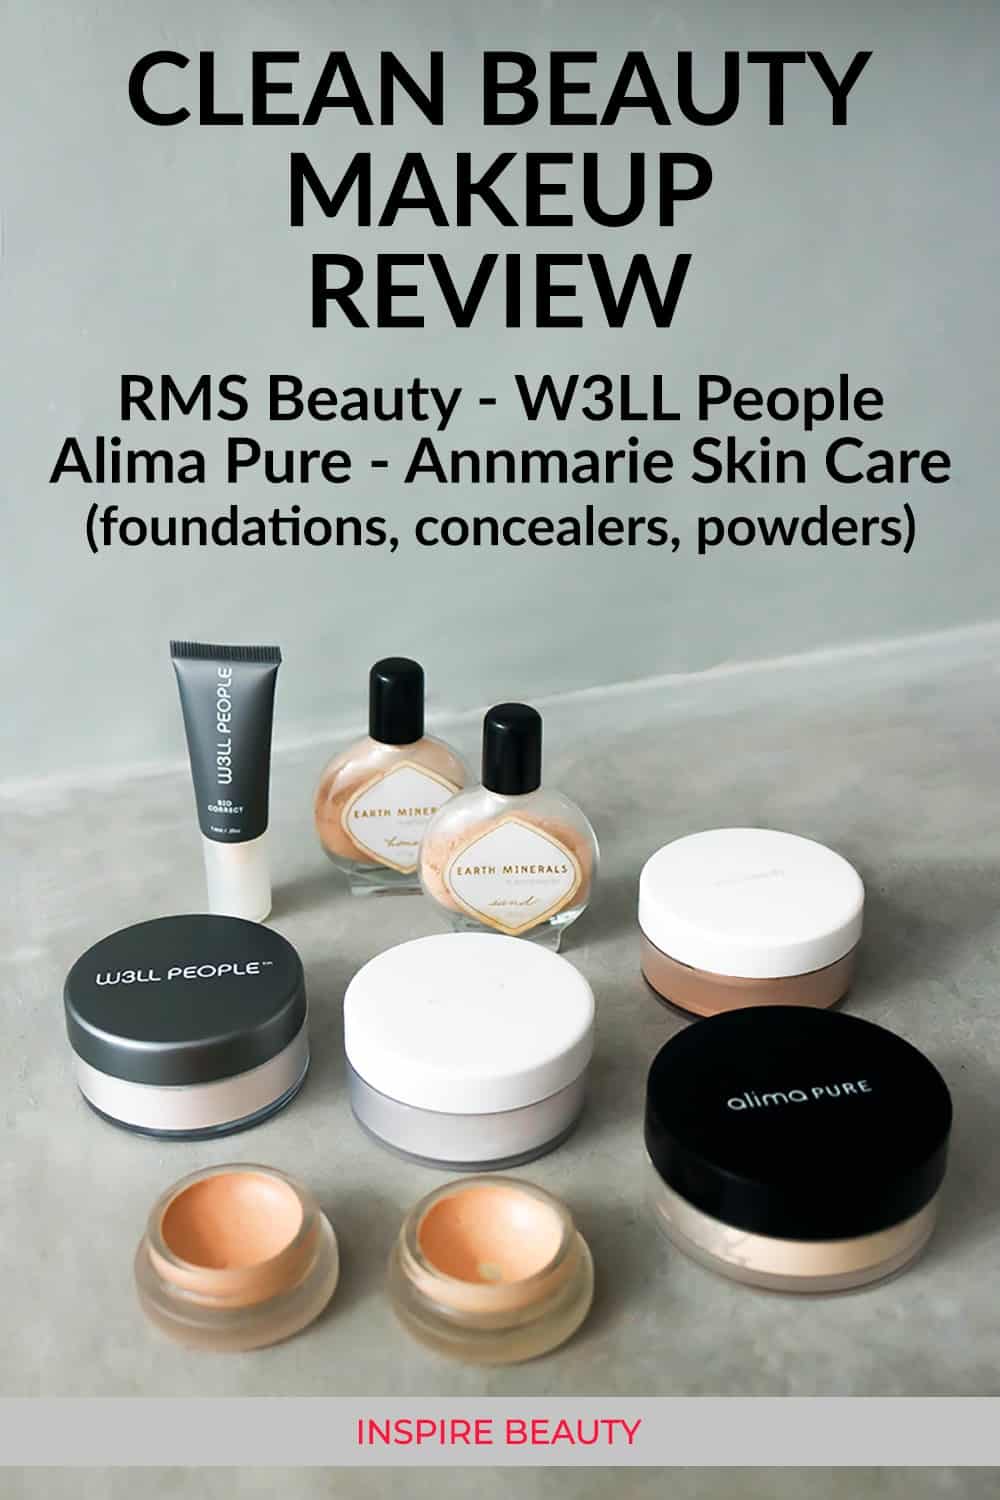 Clean beauty makeup review of foundations, concealers and powders from Annmarie Skin Care, W3LL People, Alima Pure, and RMS Beauty.